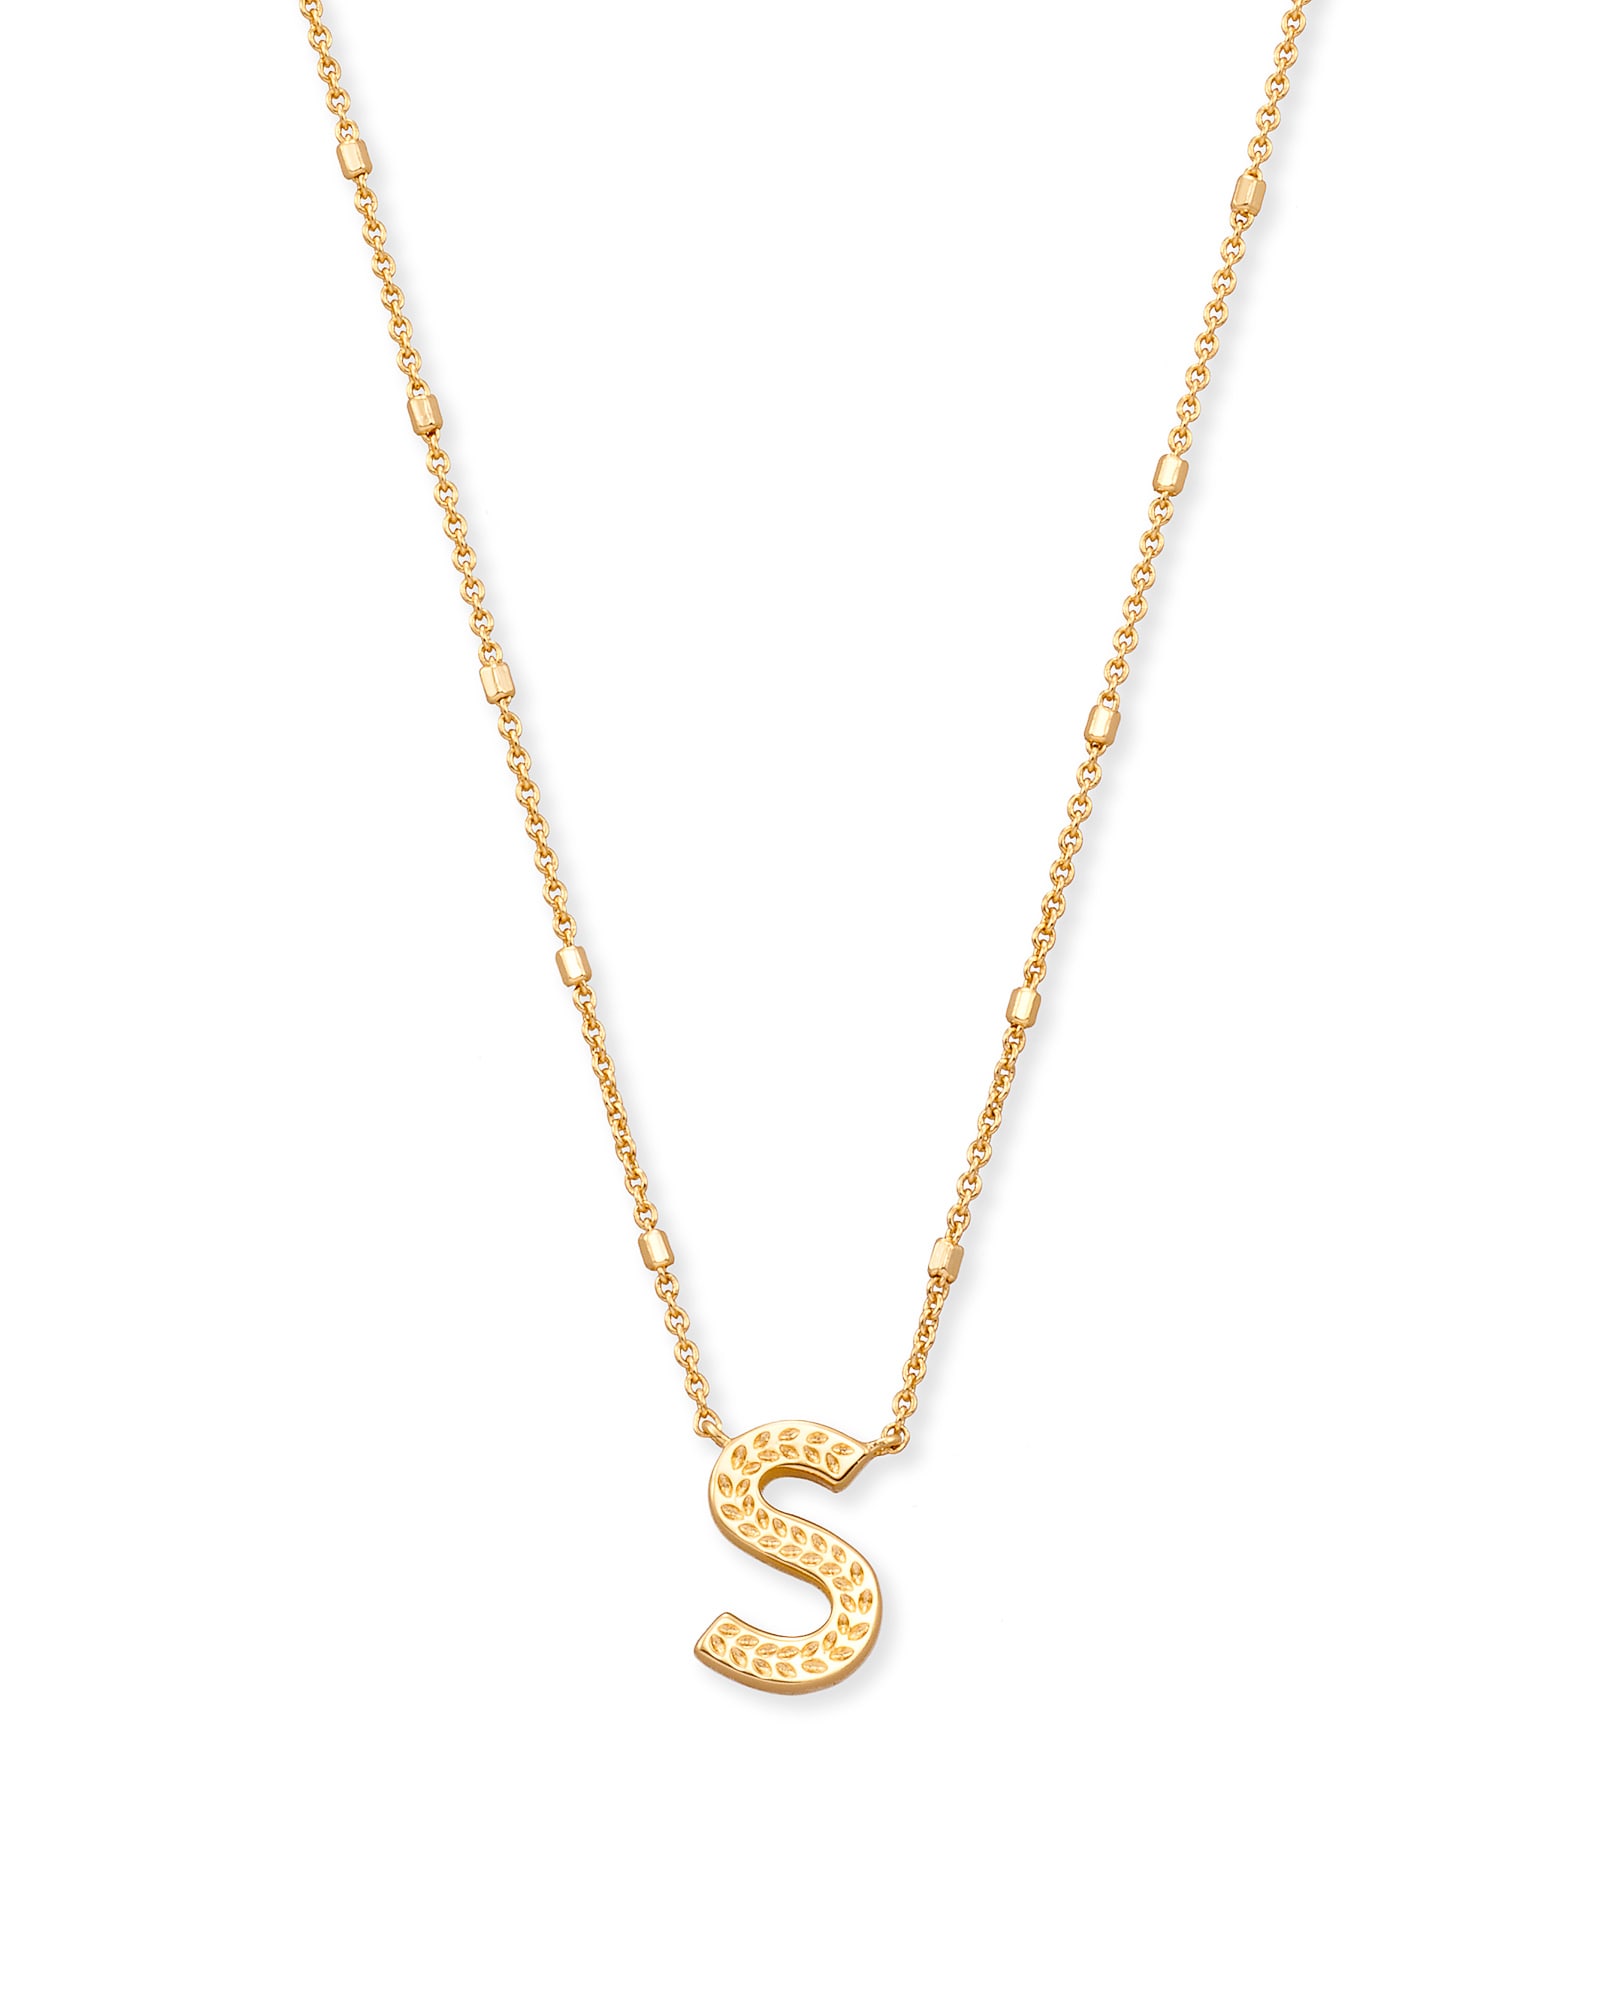 Kendra Scott Letter S Pendant Necklace in Gold | Plated Brass